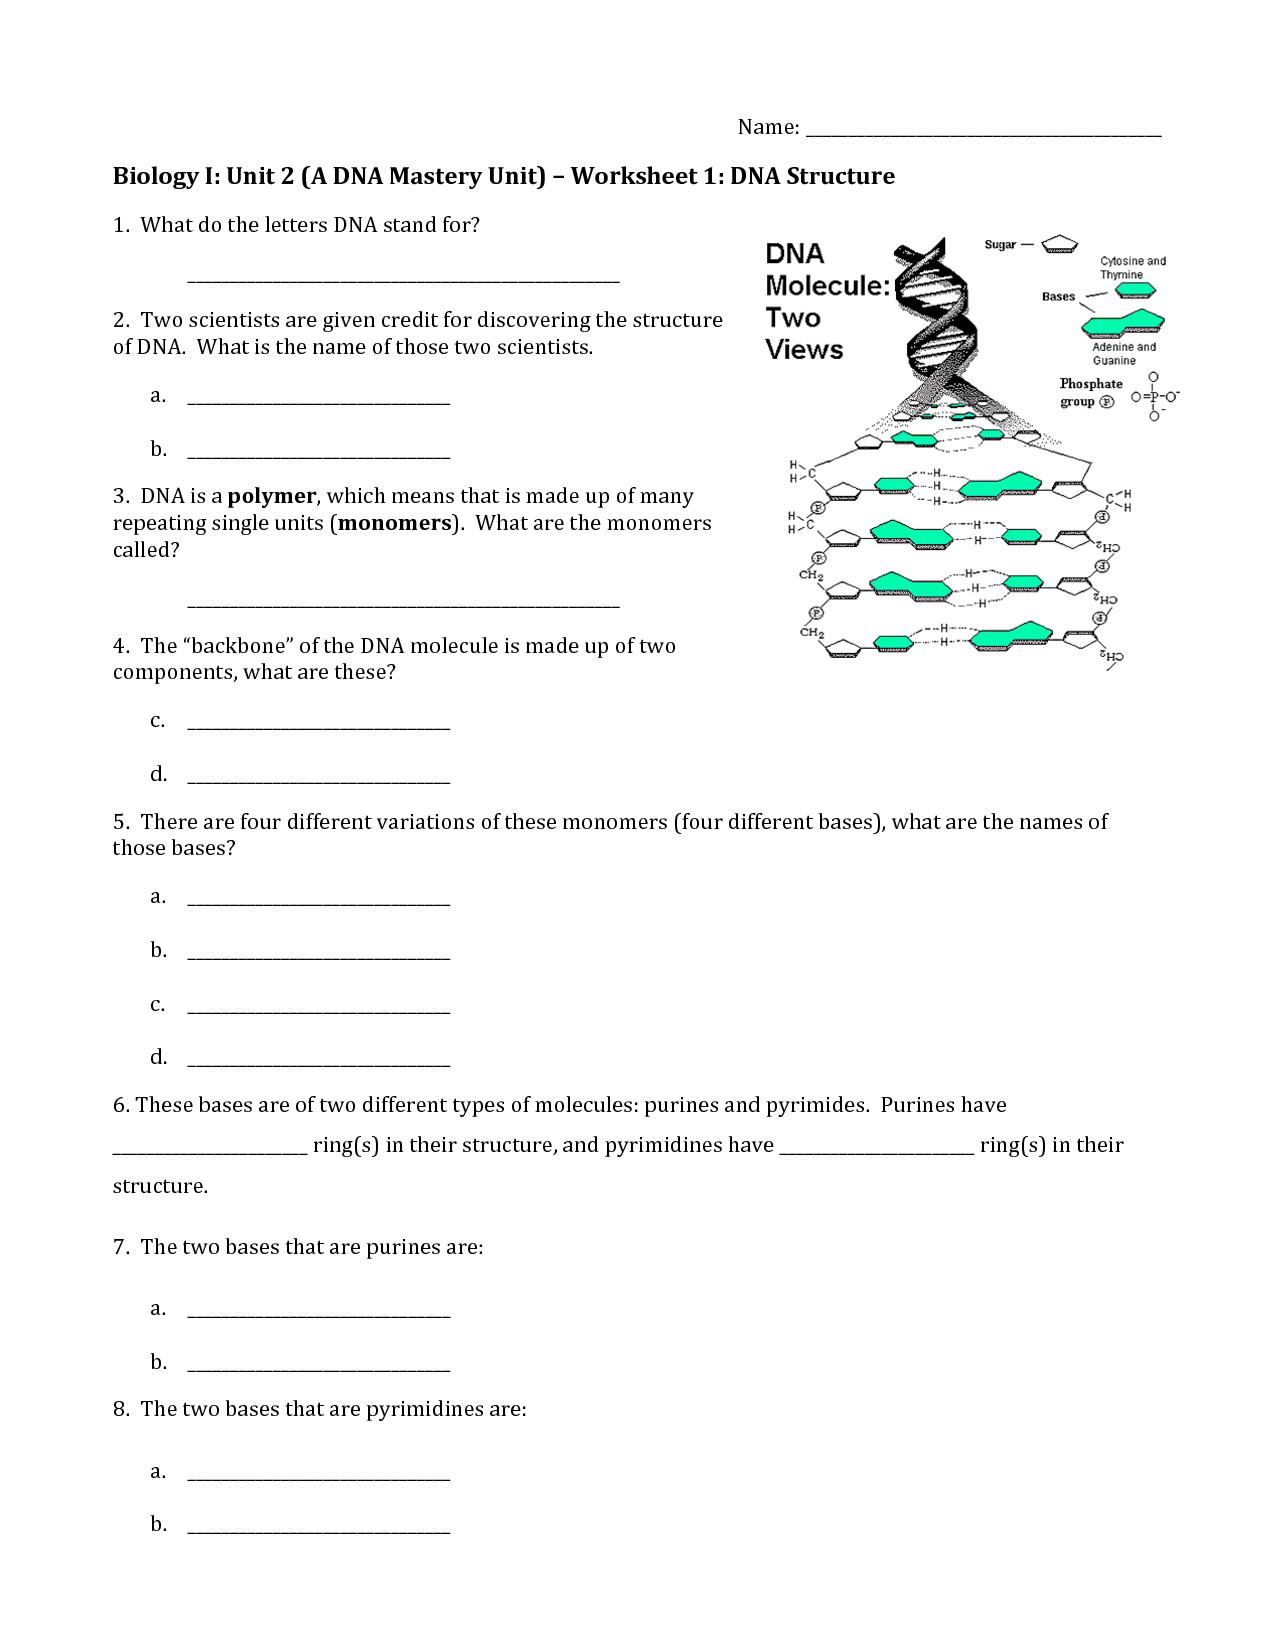 19 Best Images of DNA Replication Structure Worksheet And ...